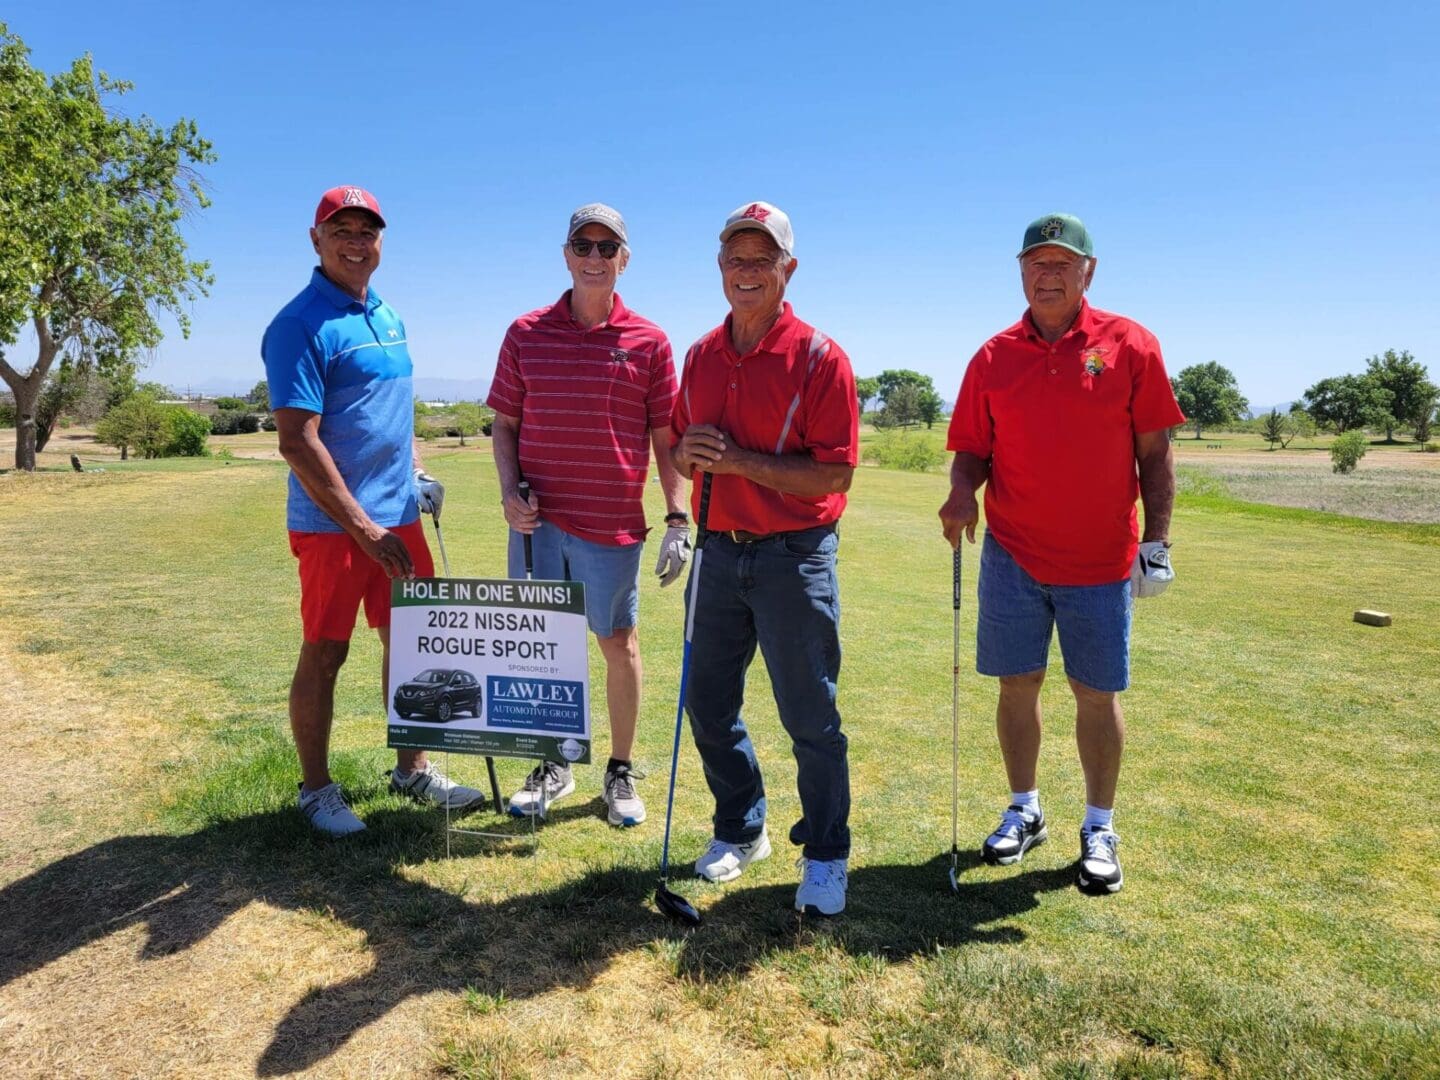 Four men standing on a golf course holding golf clubs.